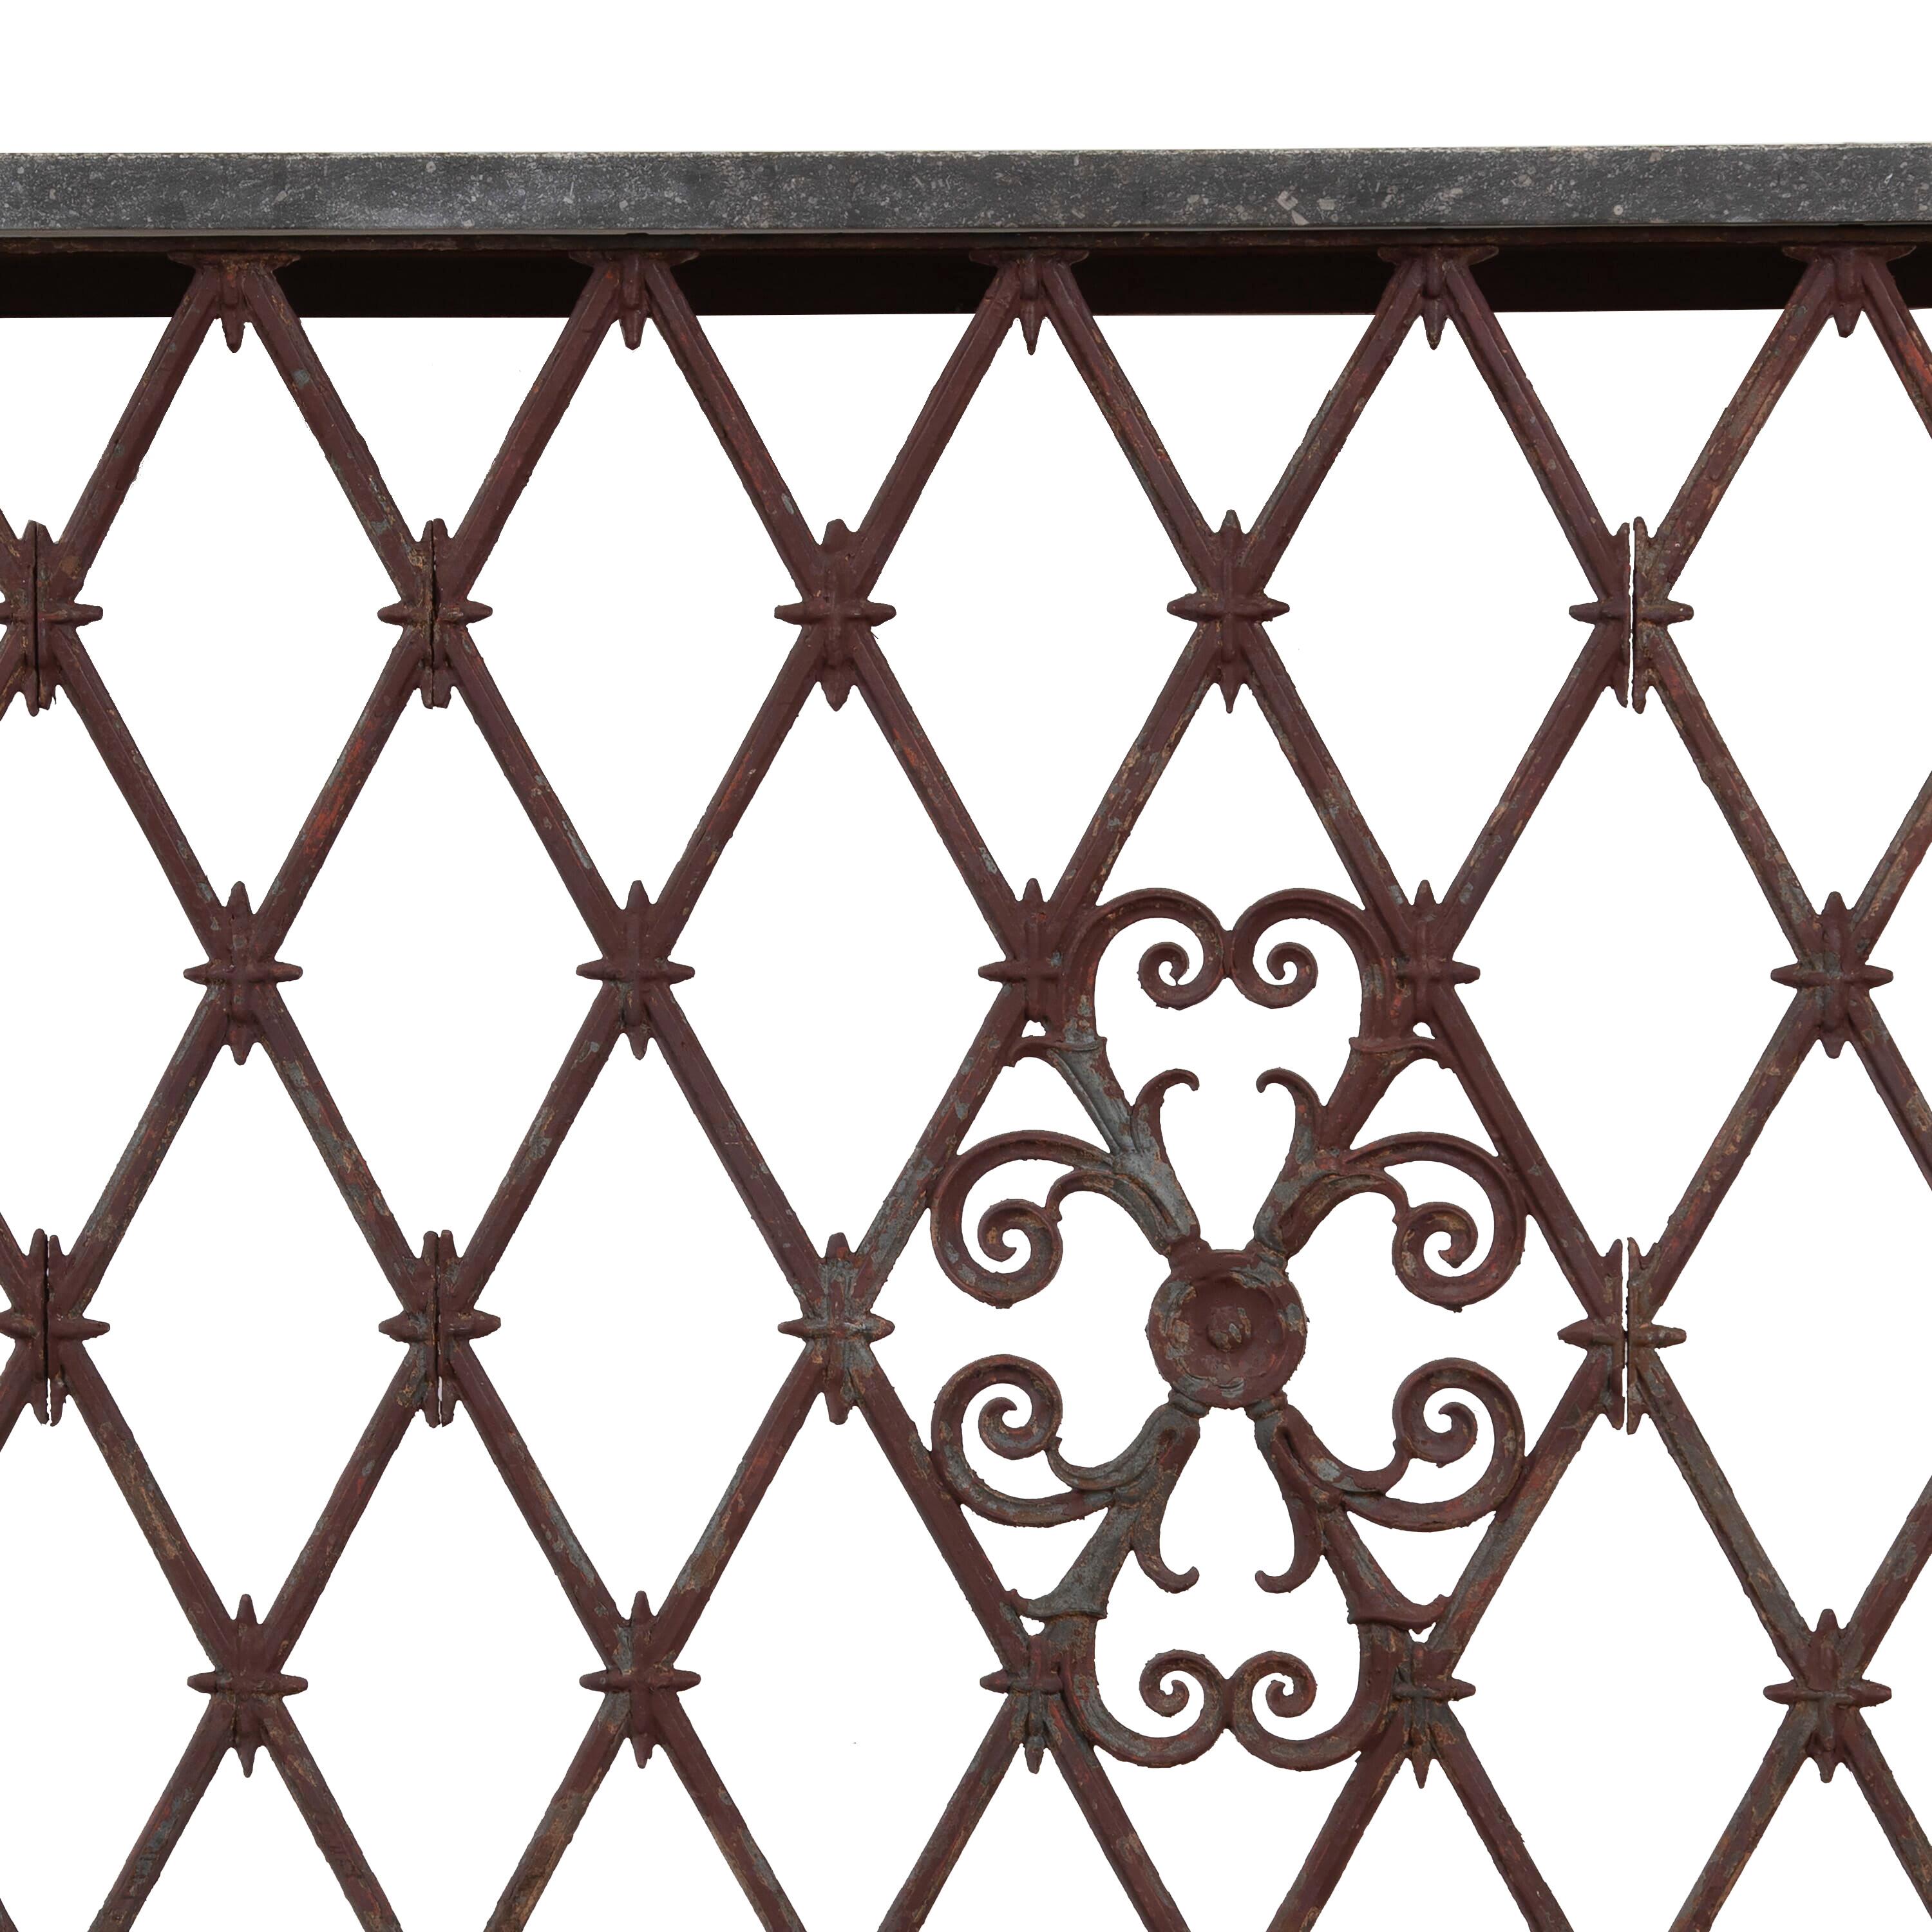 19th Century iron work balcony converted to a console.
This would work well as a radiator cover but can be used both inside and out.
Featuring a decorative harlequin design in the ironwork and original patina.
The top is made of Belgium blue